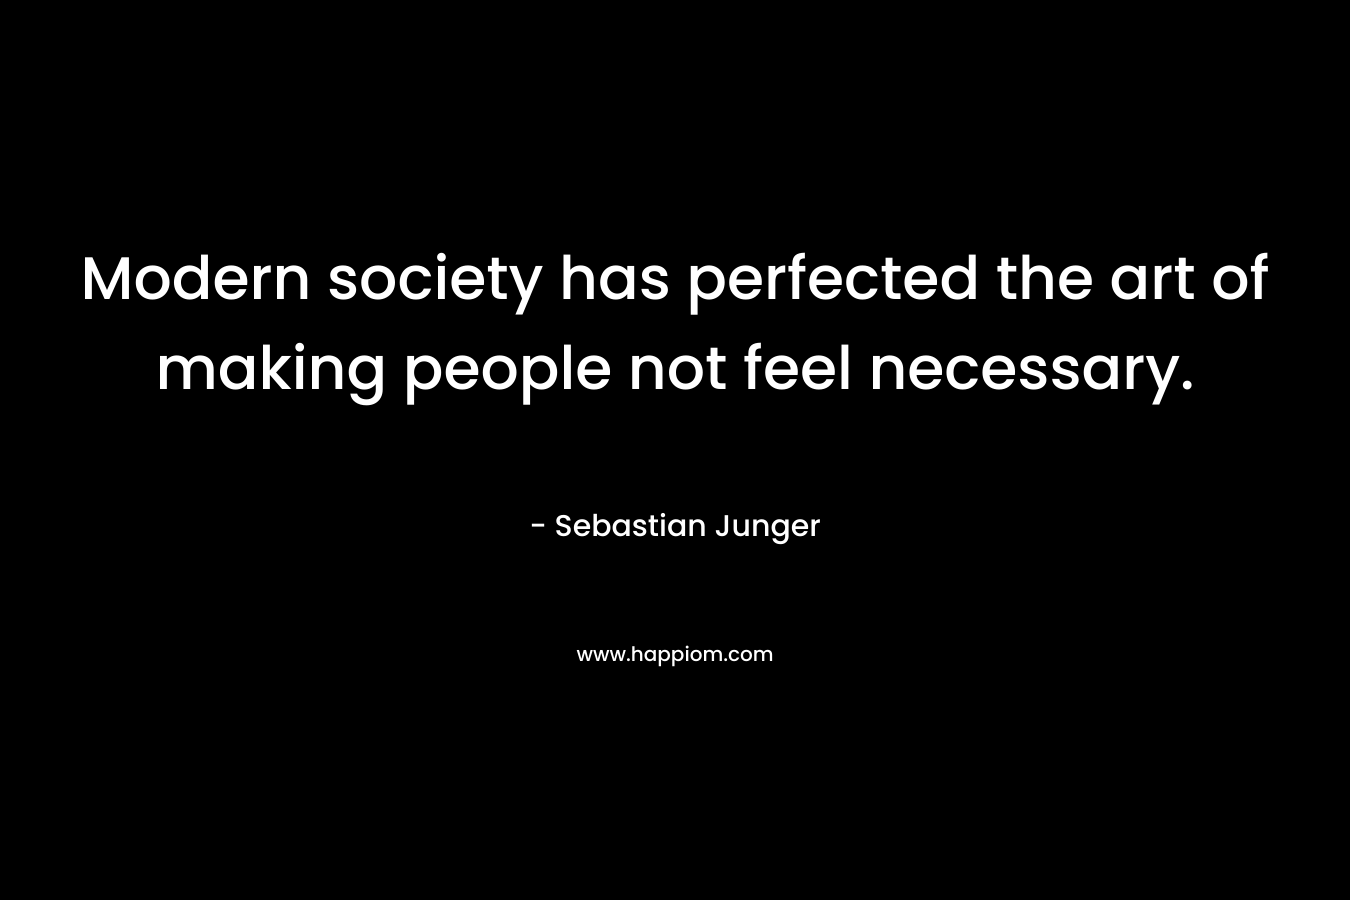 Modern society has perfected the art of making people not feel necessary.